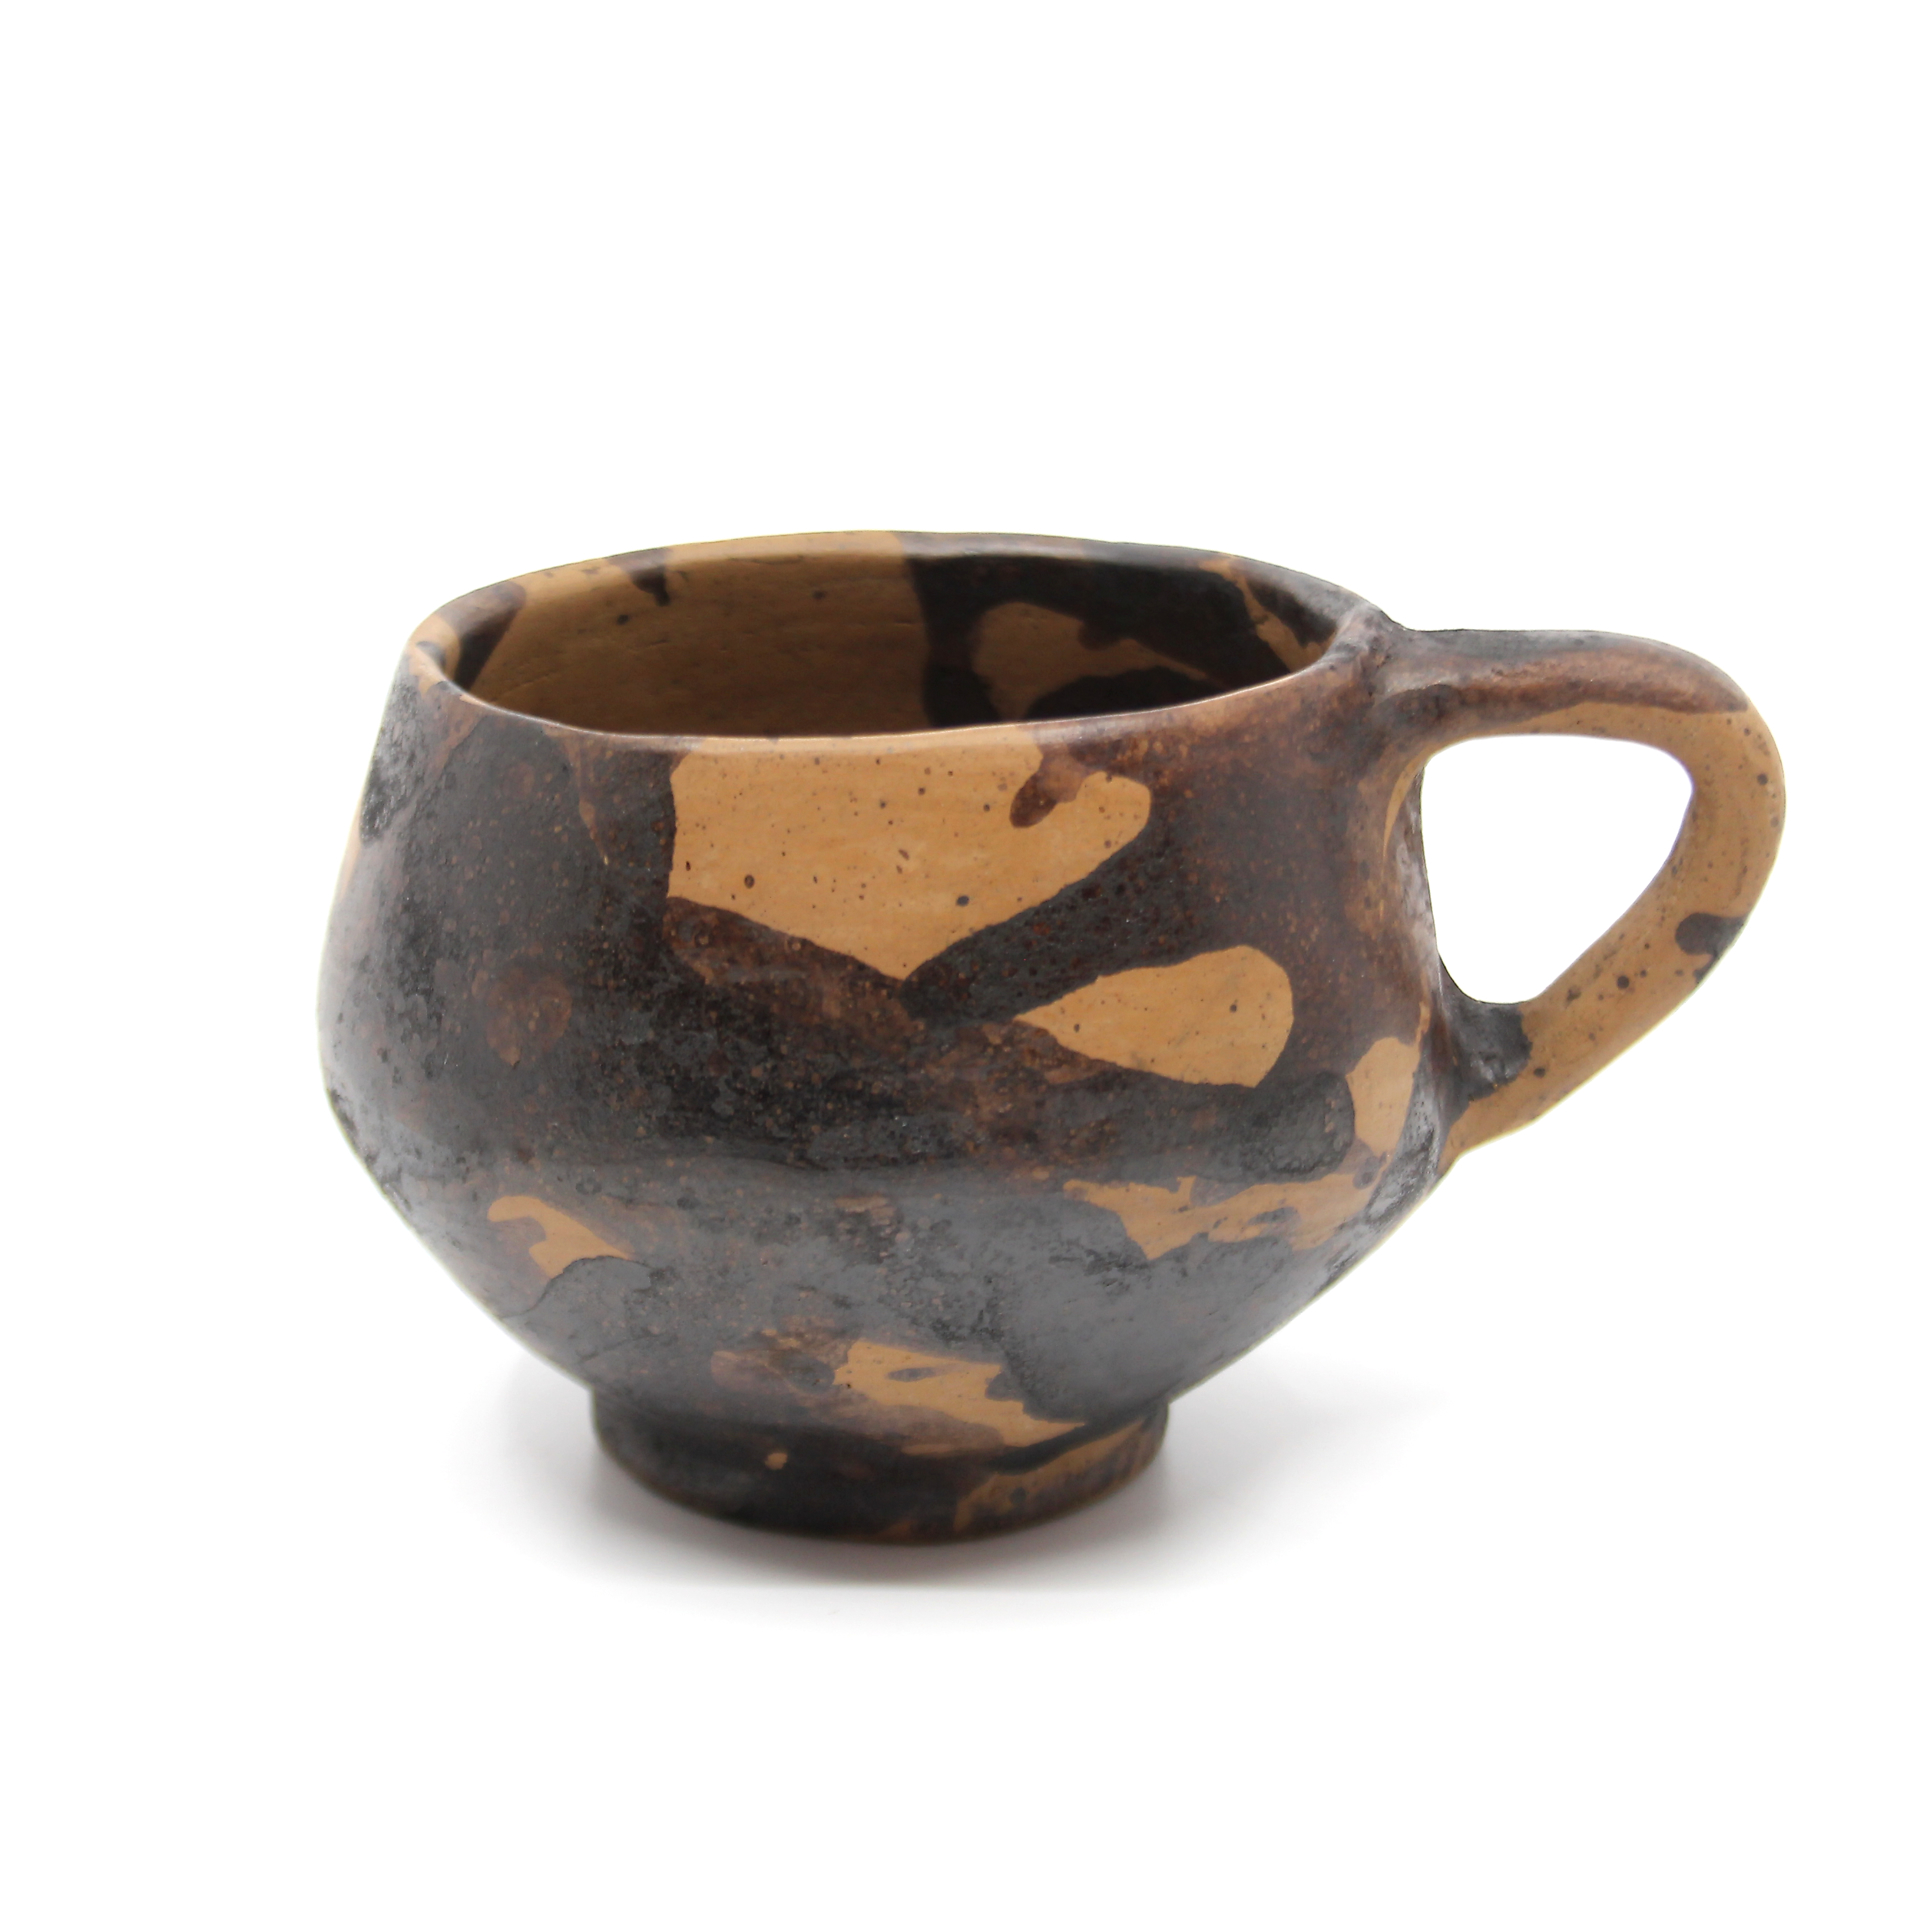 Nabora Coffee Cup by Colectivo 1050°